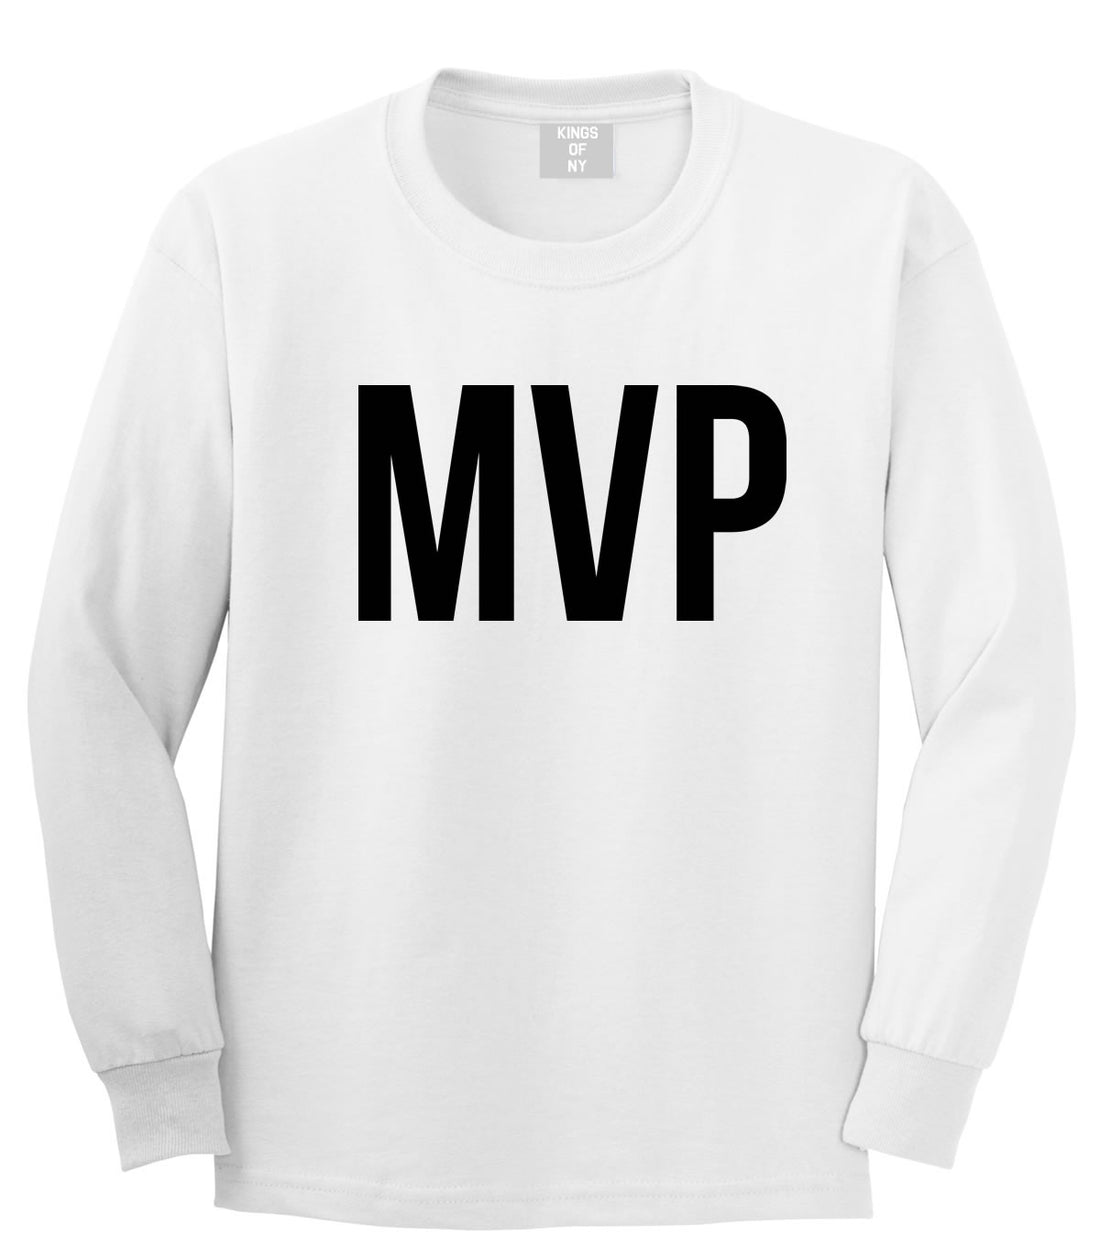 Kings Of NY MVP Most Valuable Player Long Sleeve T-Shirt in White